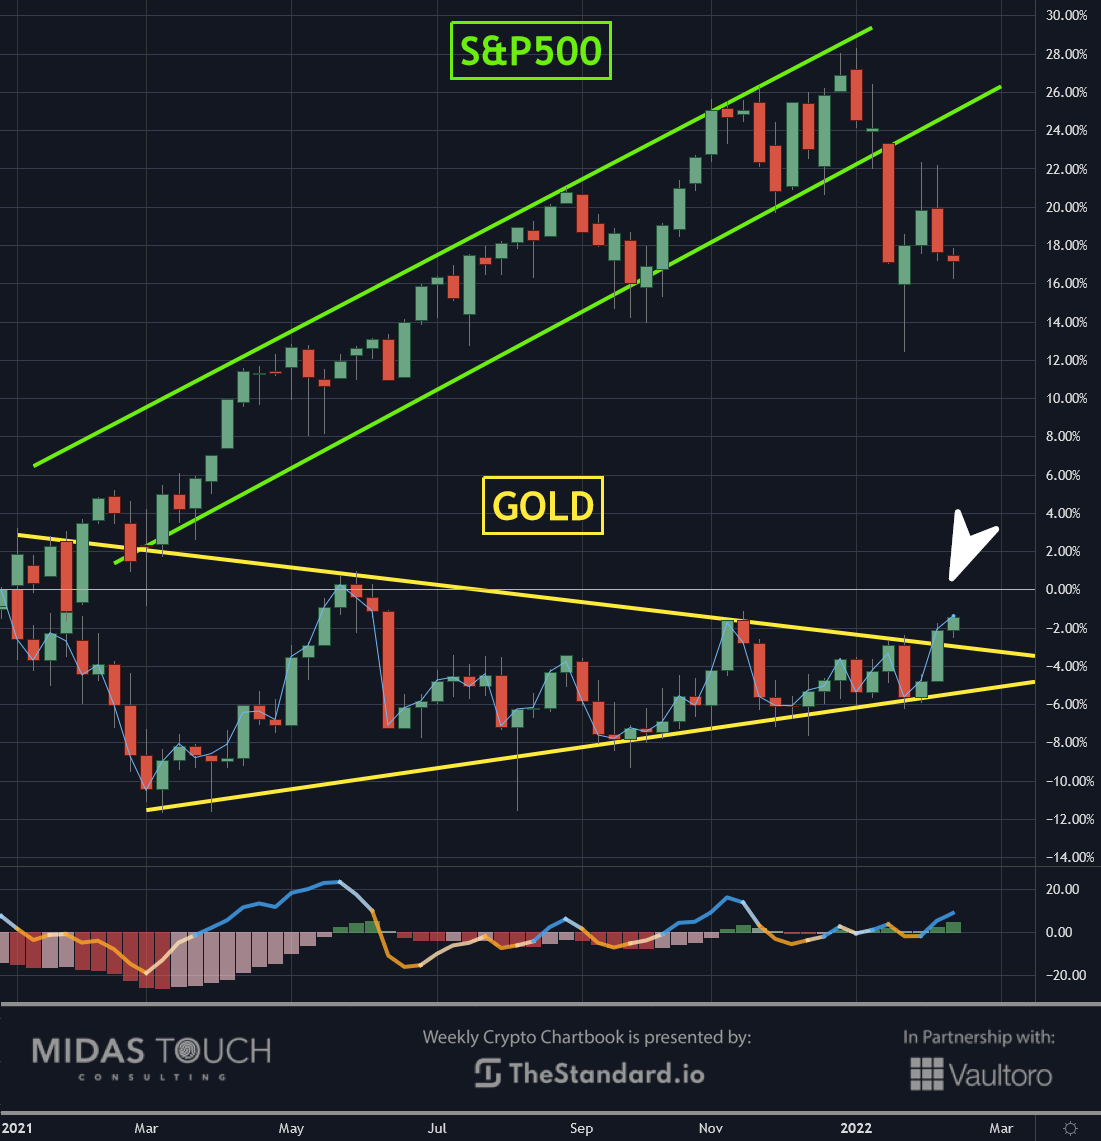 S&P500 versus Gold, weekly chart as of February 15th, 2022. Bitcoin from sideways to up